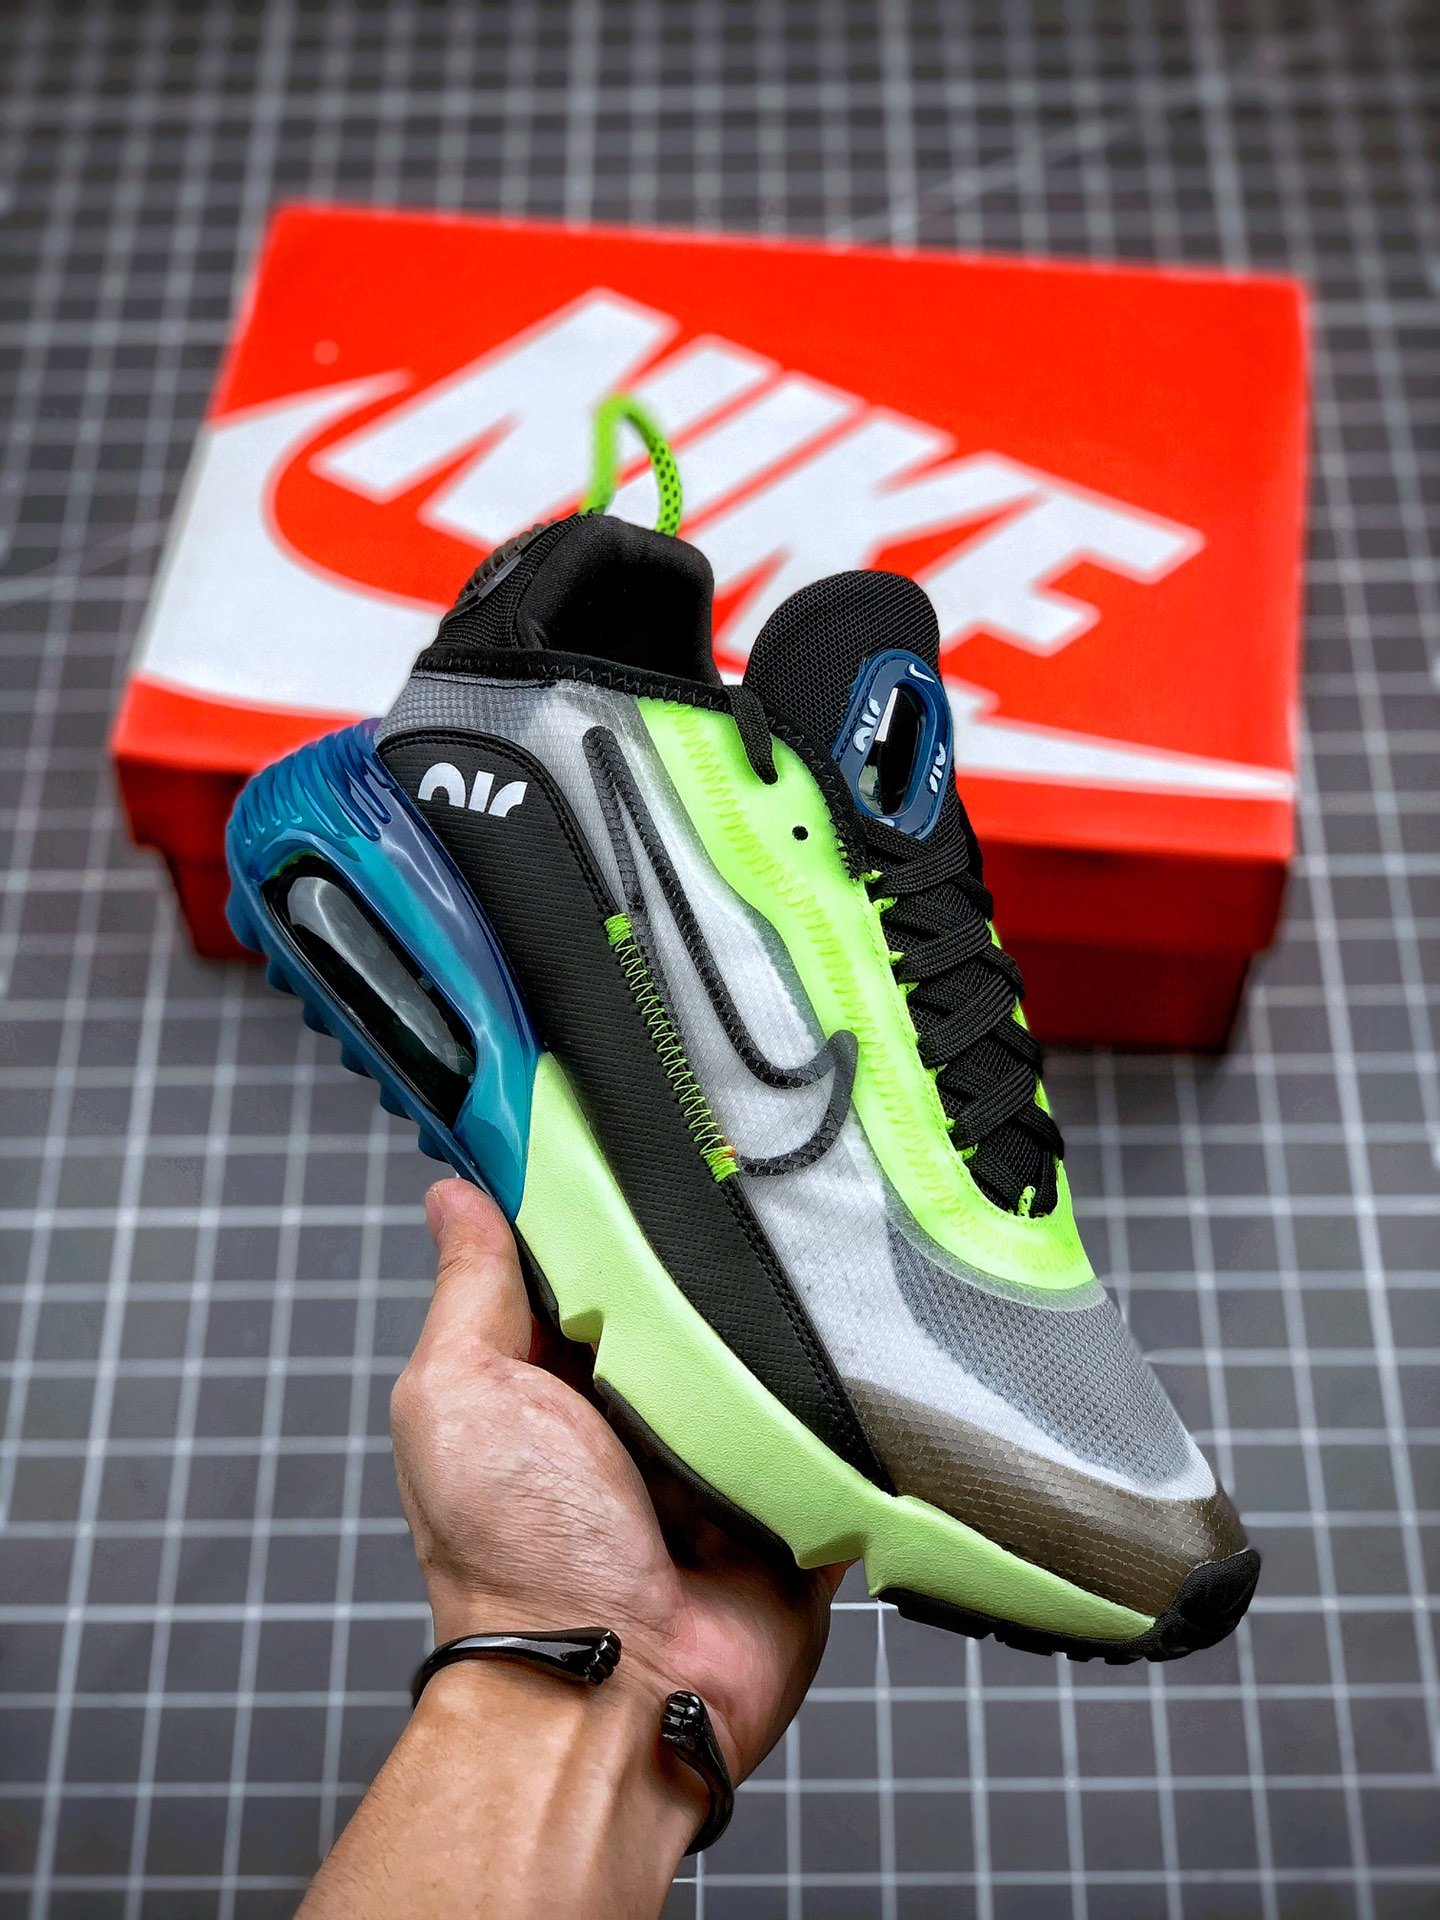 Nike Air Max 2090 White/Black-Volt-Blue Force On Sale – Sneaker Hello